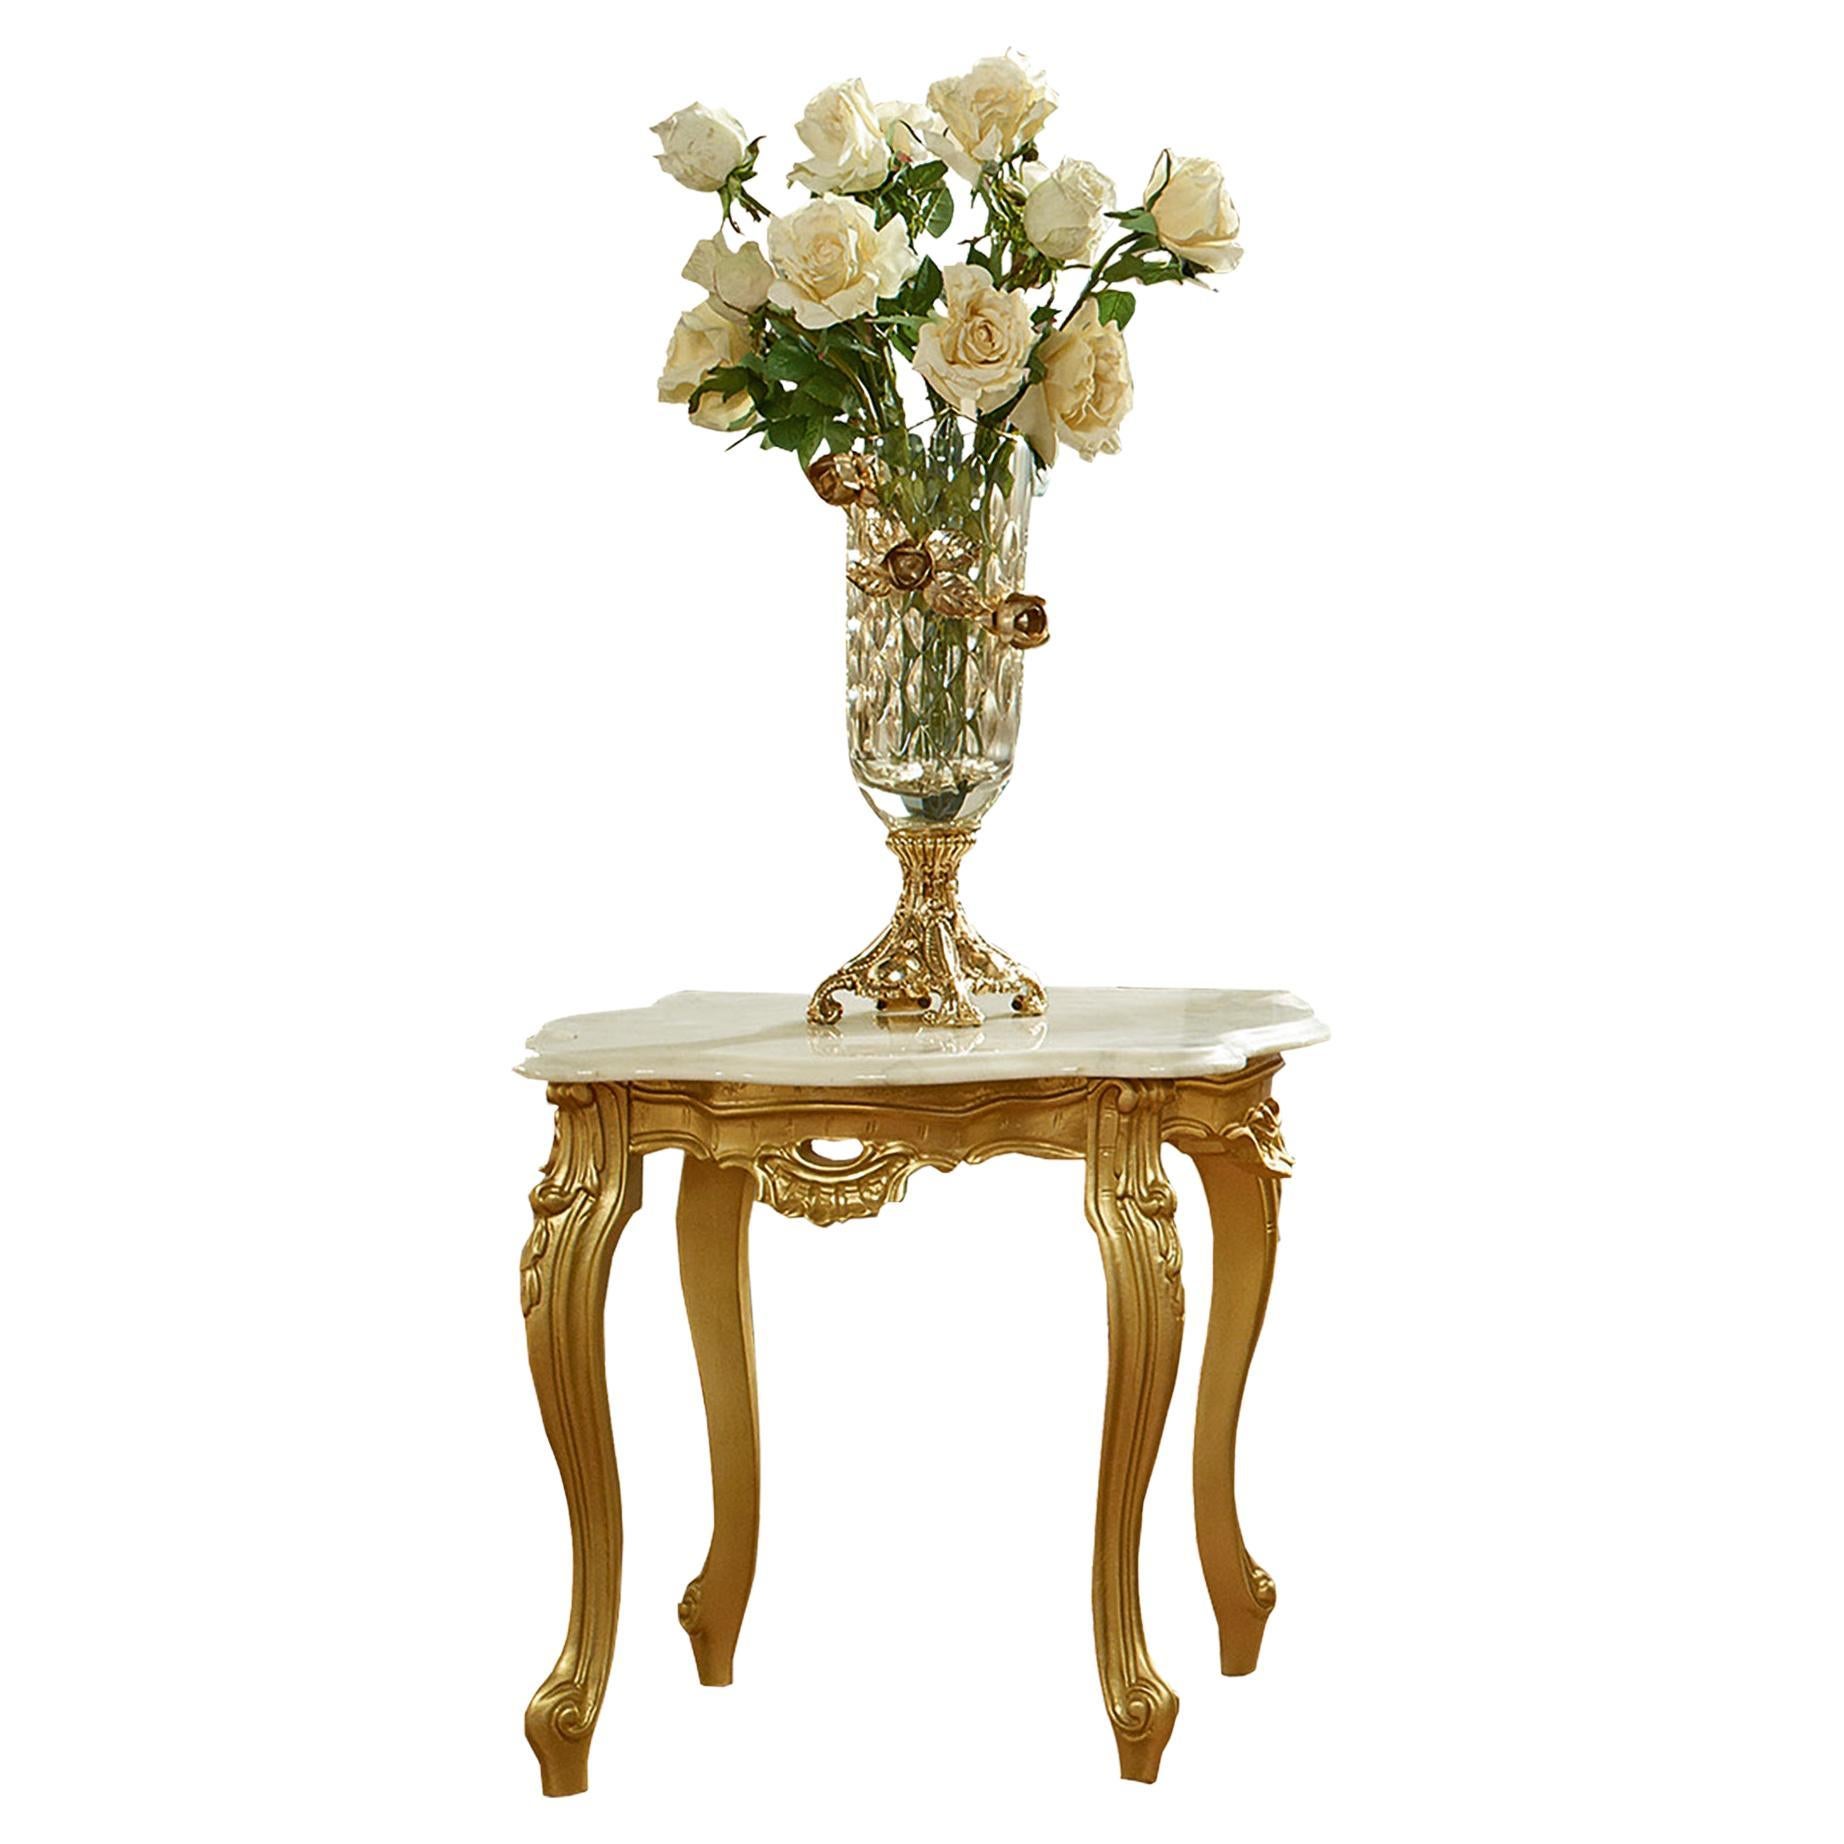 Slim Gold Leaf Side Table with White Marble Top by Modenese Luxury Interior